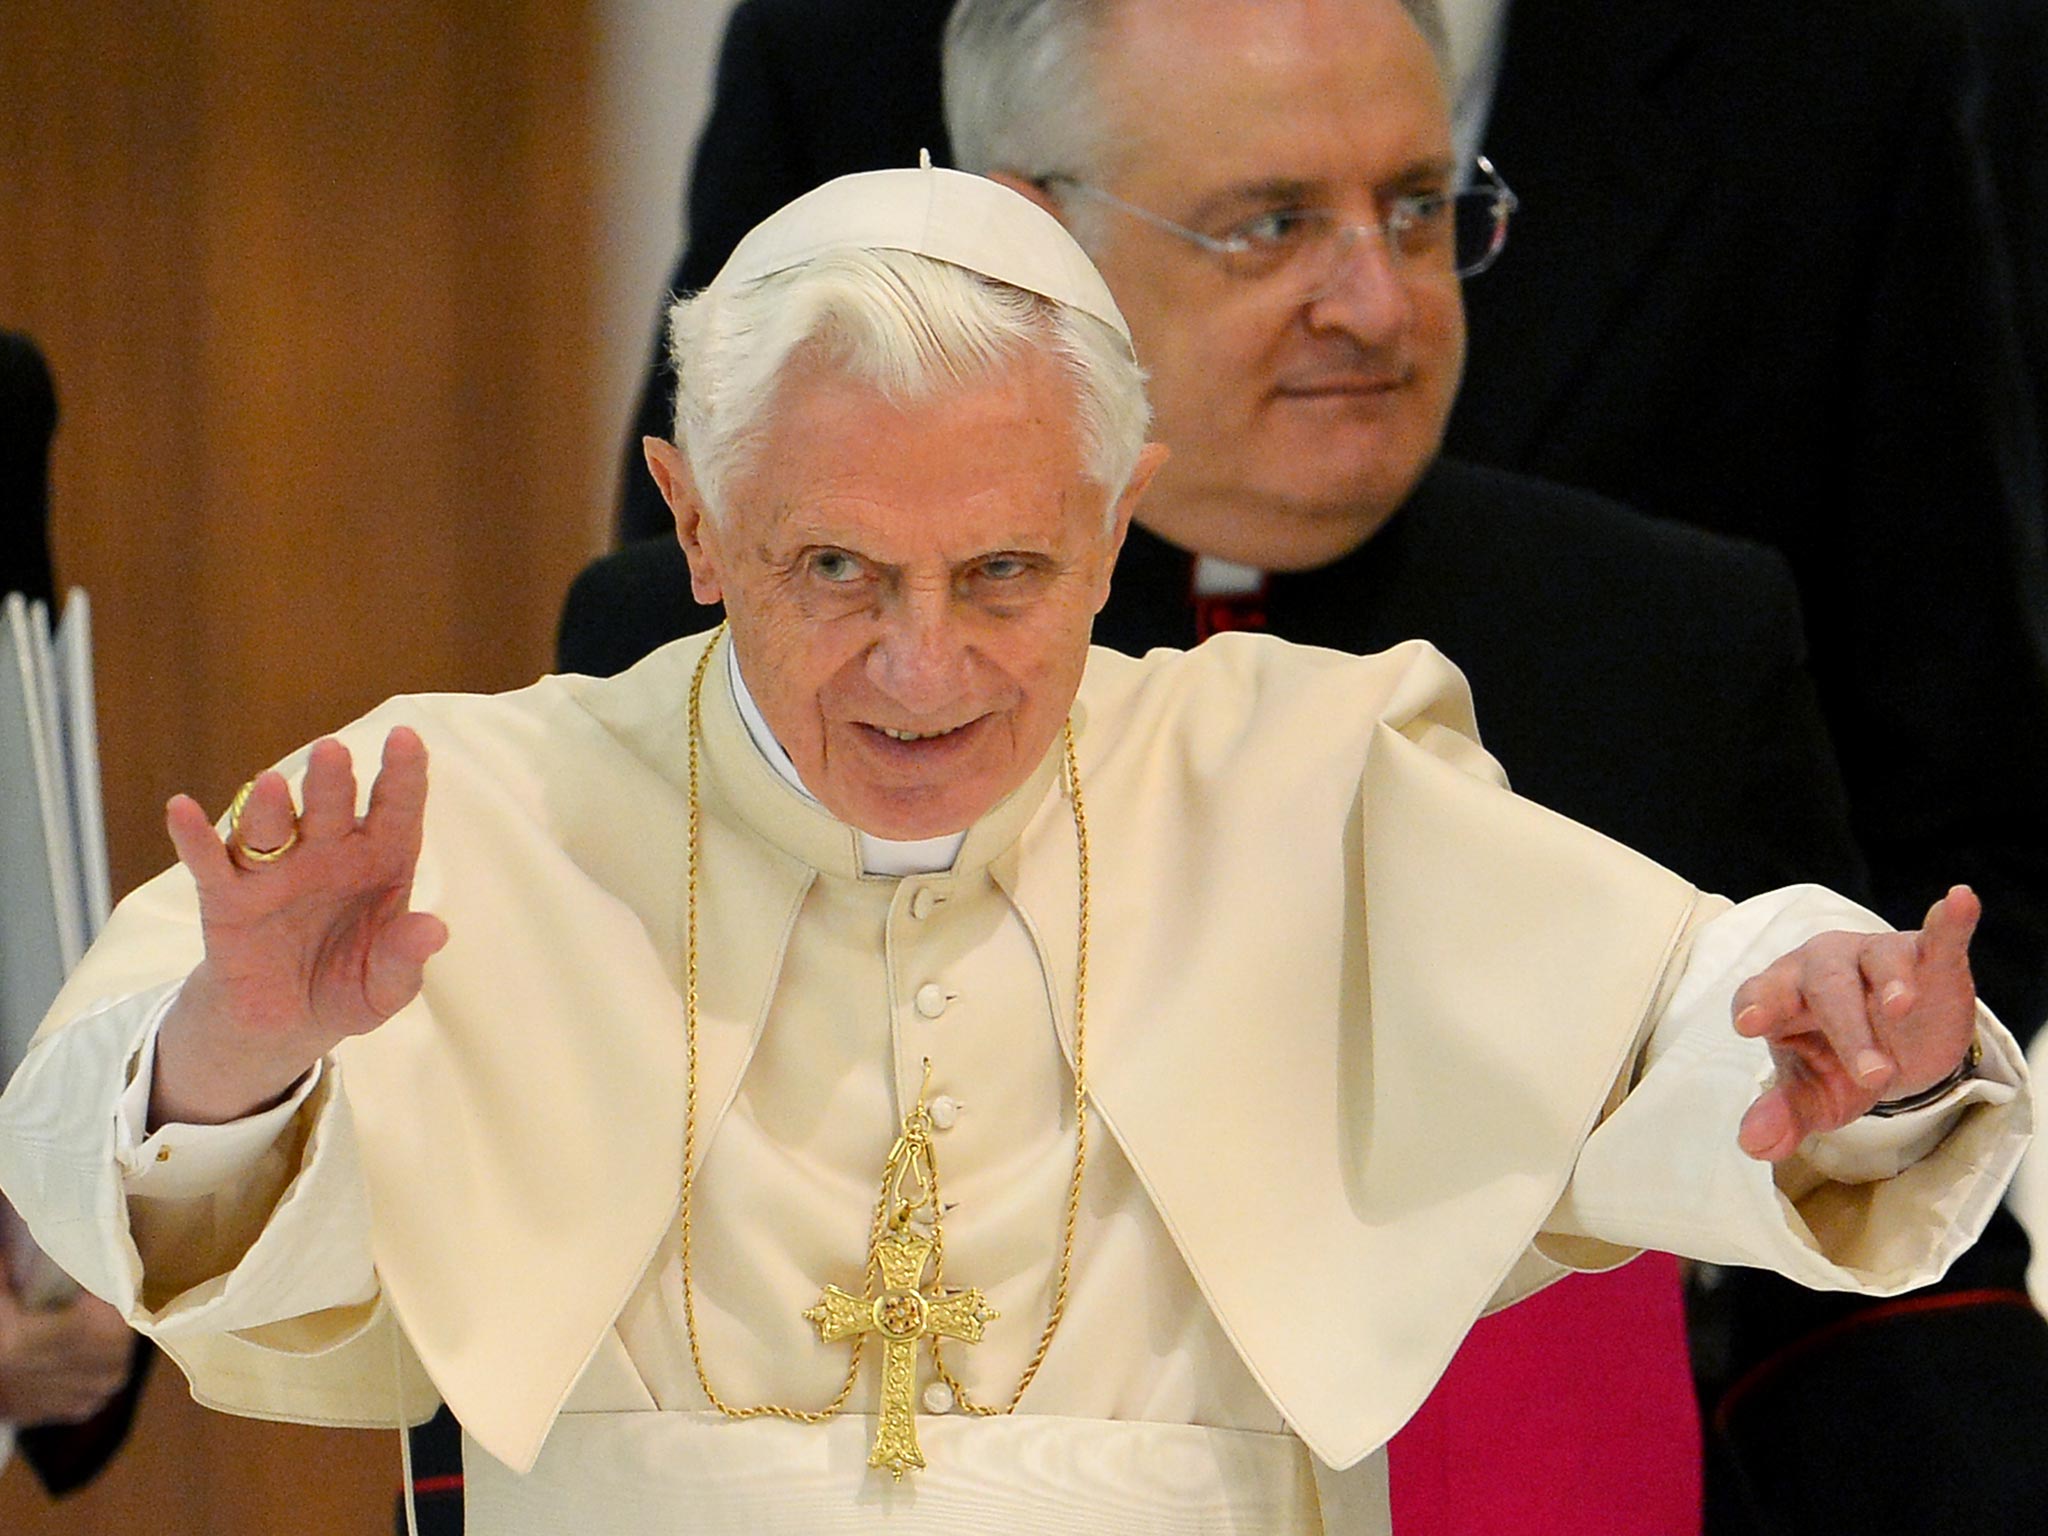 Pope Benedict XVI back in January last year, a month before he stepped down